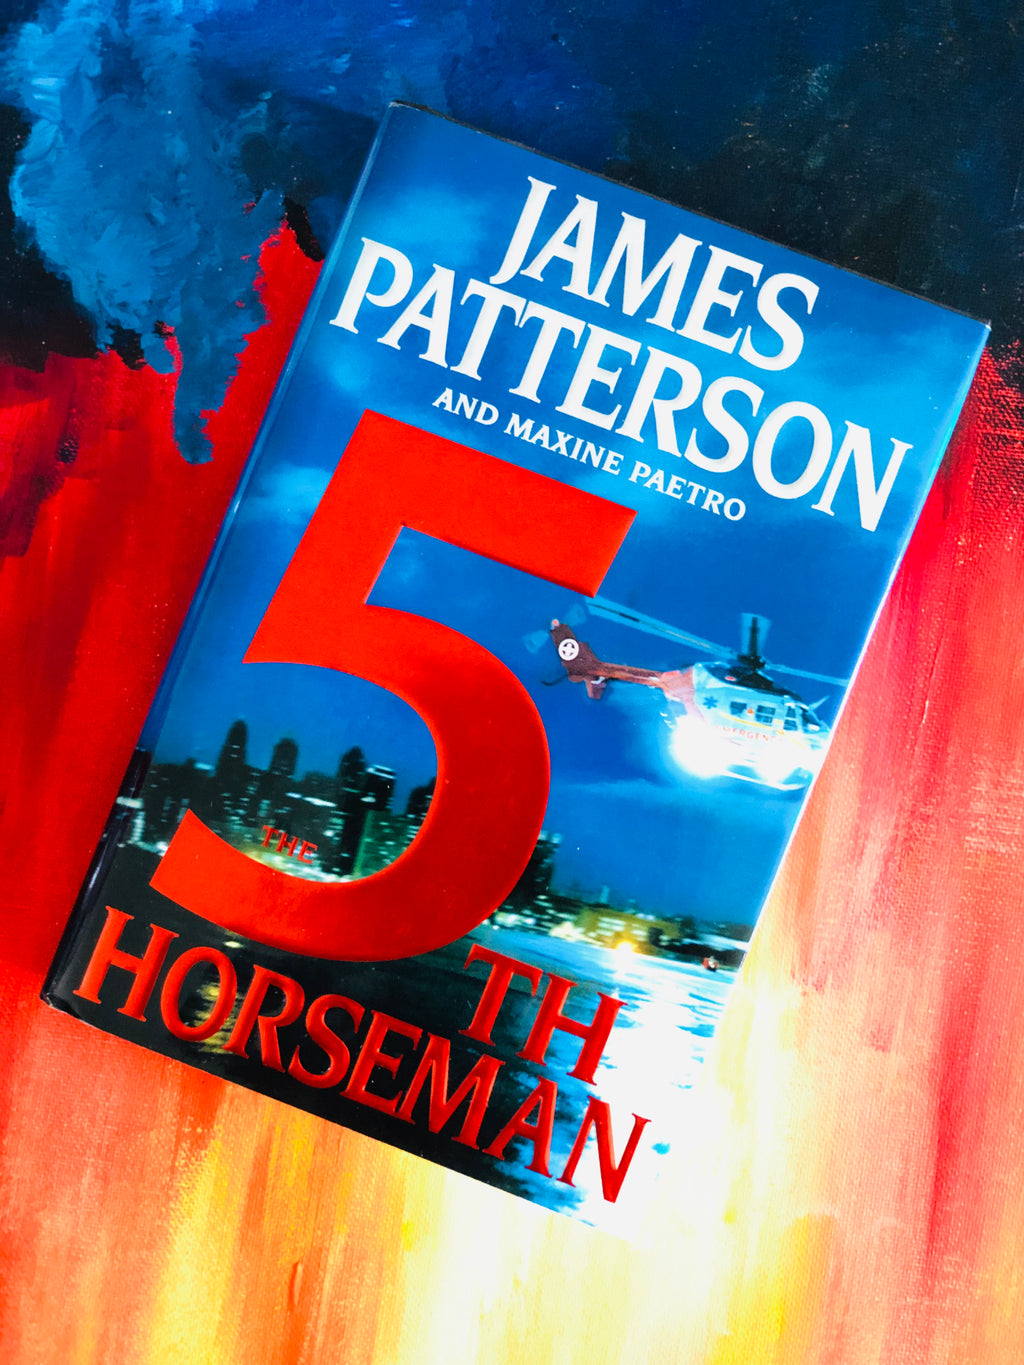 5th Horseman- By James Patterson and Maxine Paetro